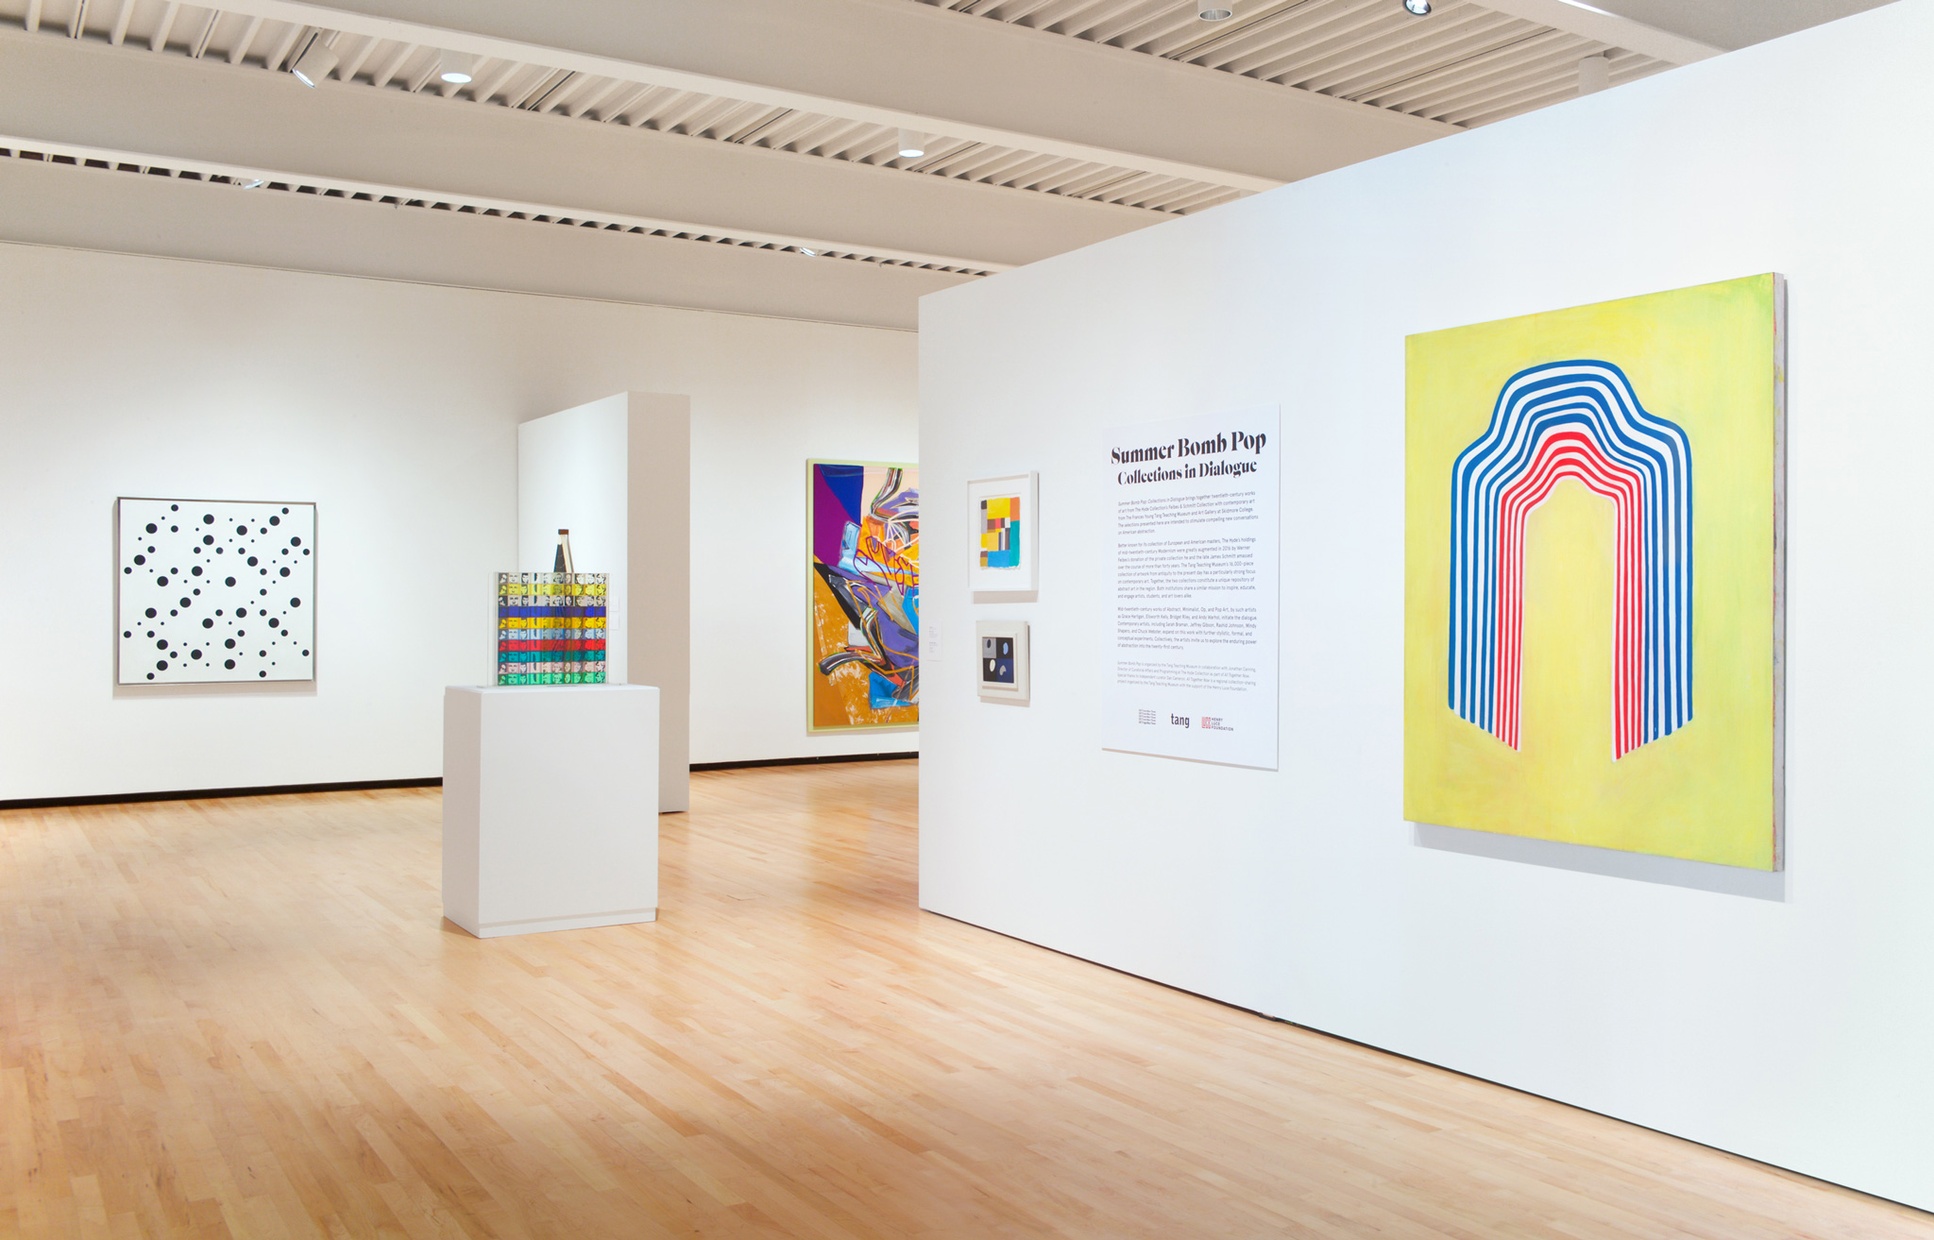 Bright artwork in various mediums is displayed in a gallery with white walls and wood floors. Text on the wall reads "Summer Bomb Pop" with smaller text below.